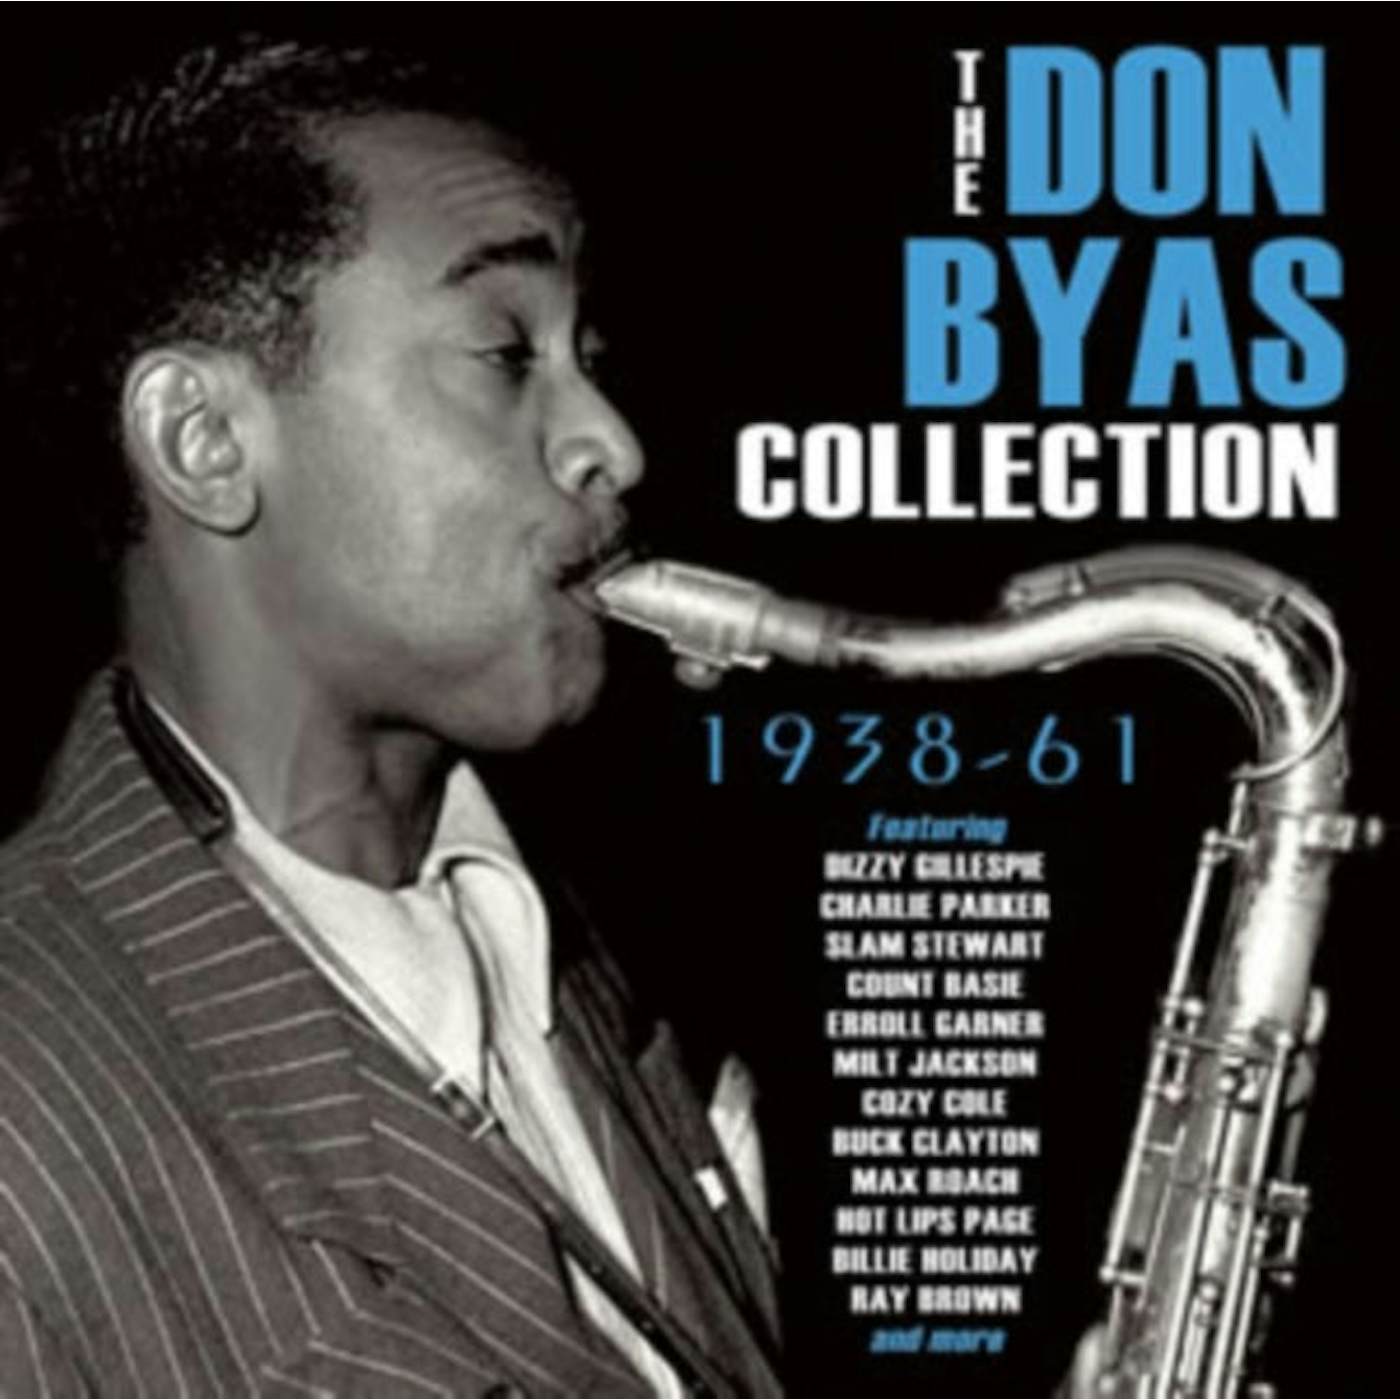 Don Byas CD - The Don Byas Collection 19 38-19 61